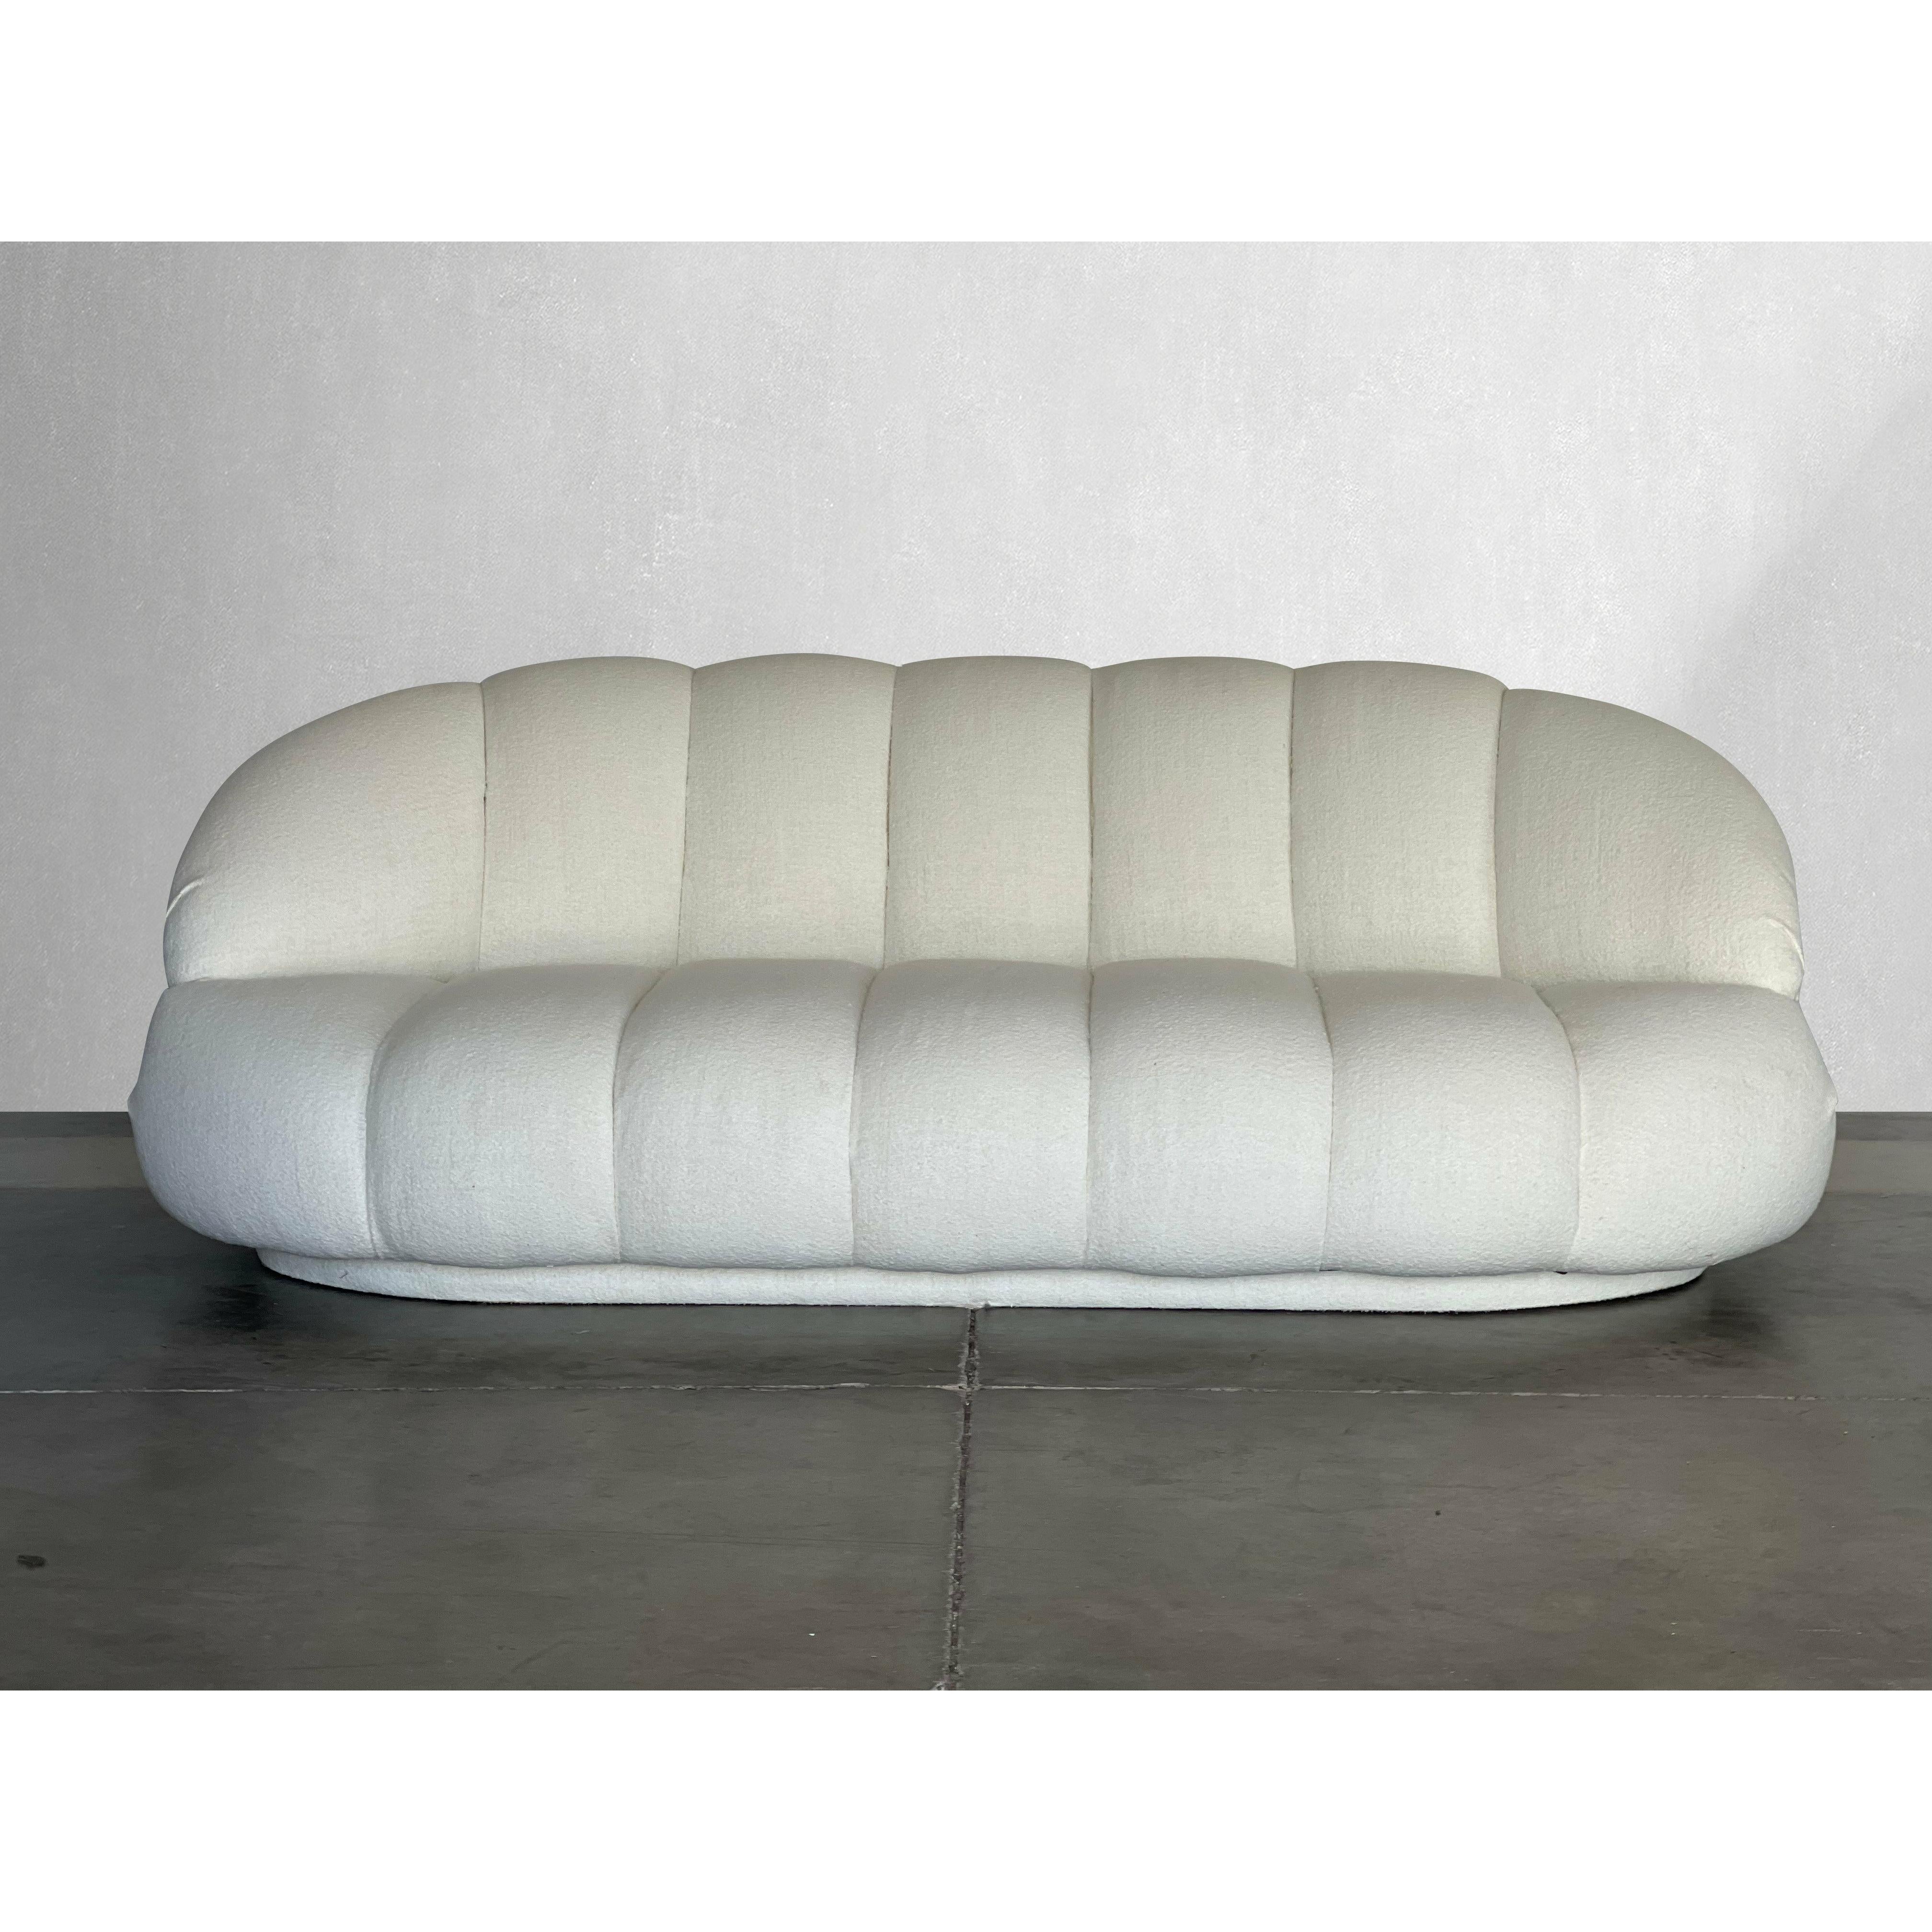 Beautifully channeled sofa by A. Rudin recovered in Italian Boucle. The fabric and construction of this sofa is very high quality. It is a beautiful and timeless piece that fits well into many spaces and with many décor styles. Truly one of our